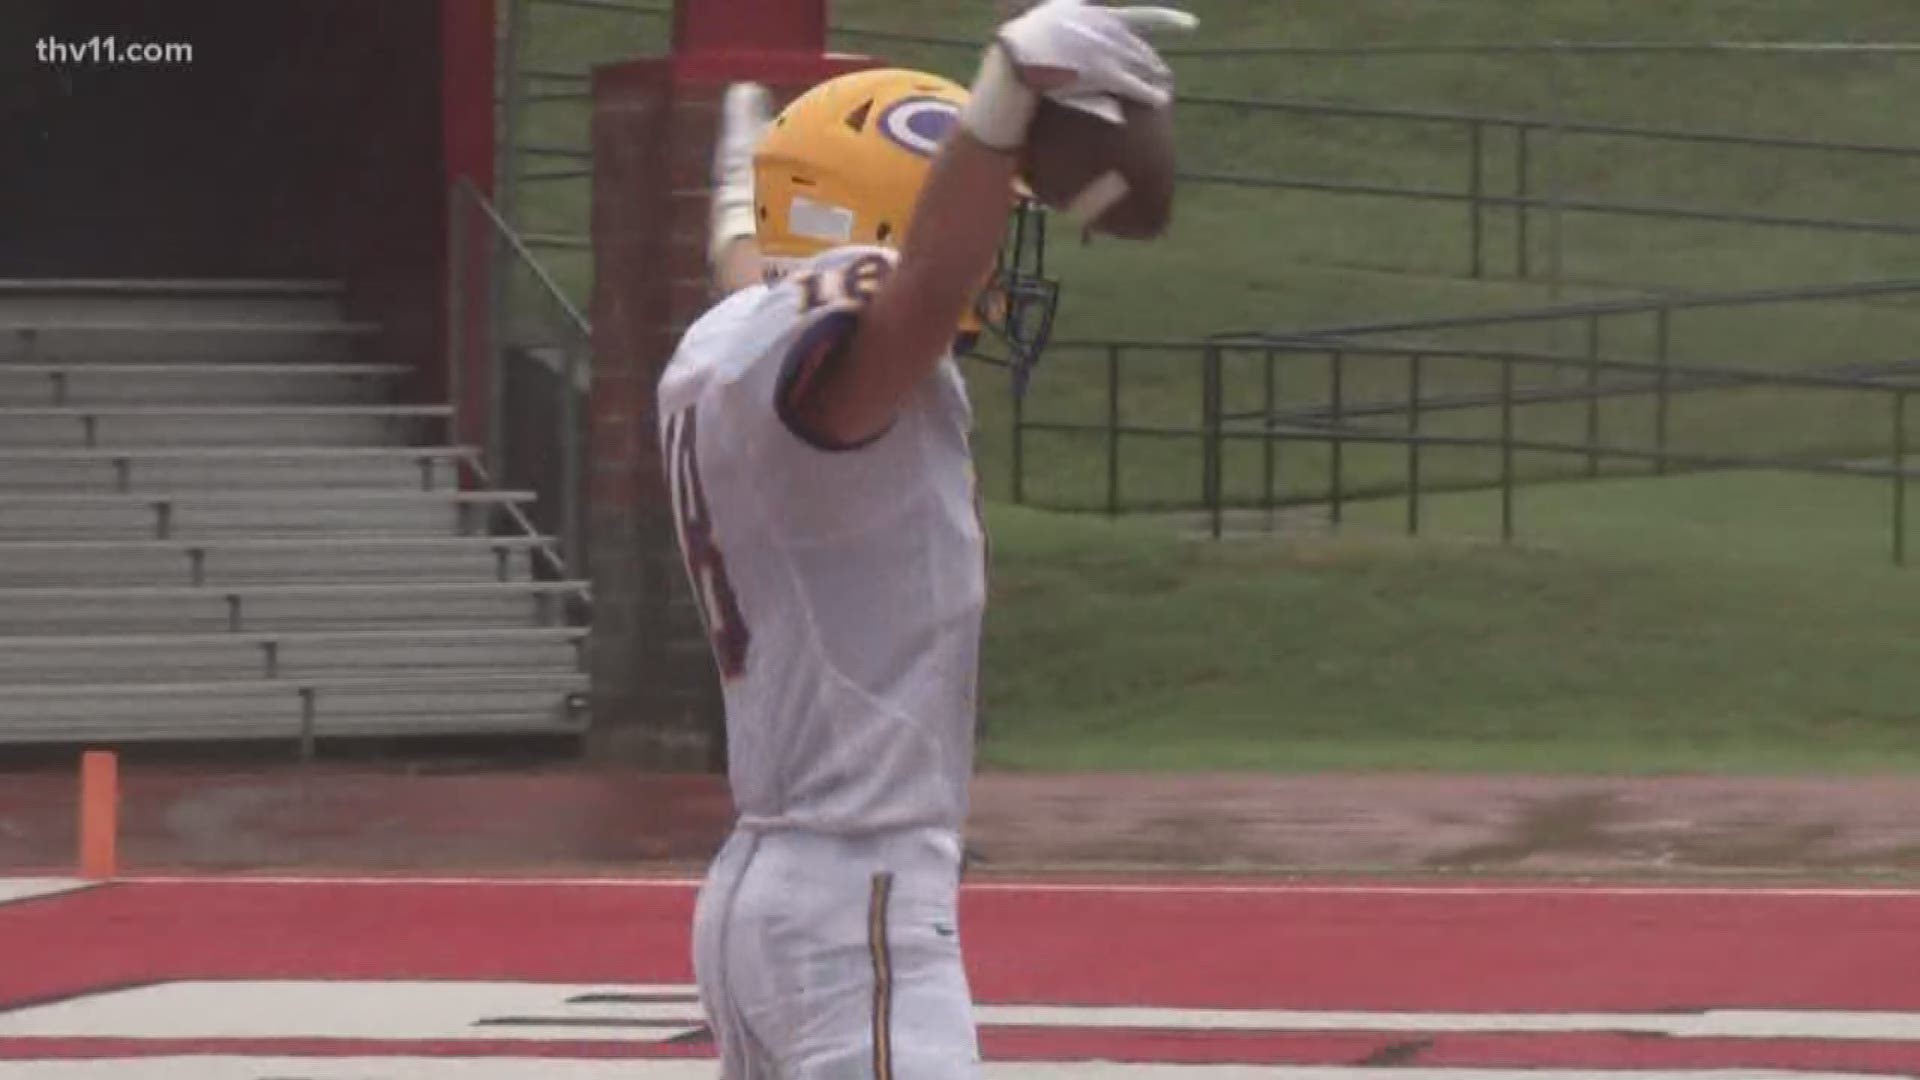 Catholic High Rockets win Yarnell's Sweetest Play of the Week for week 4